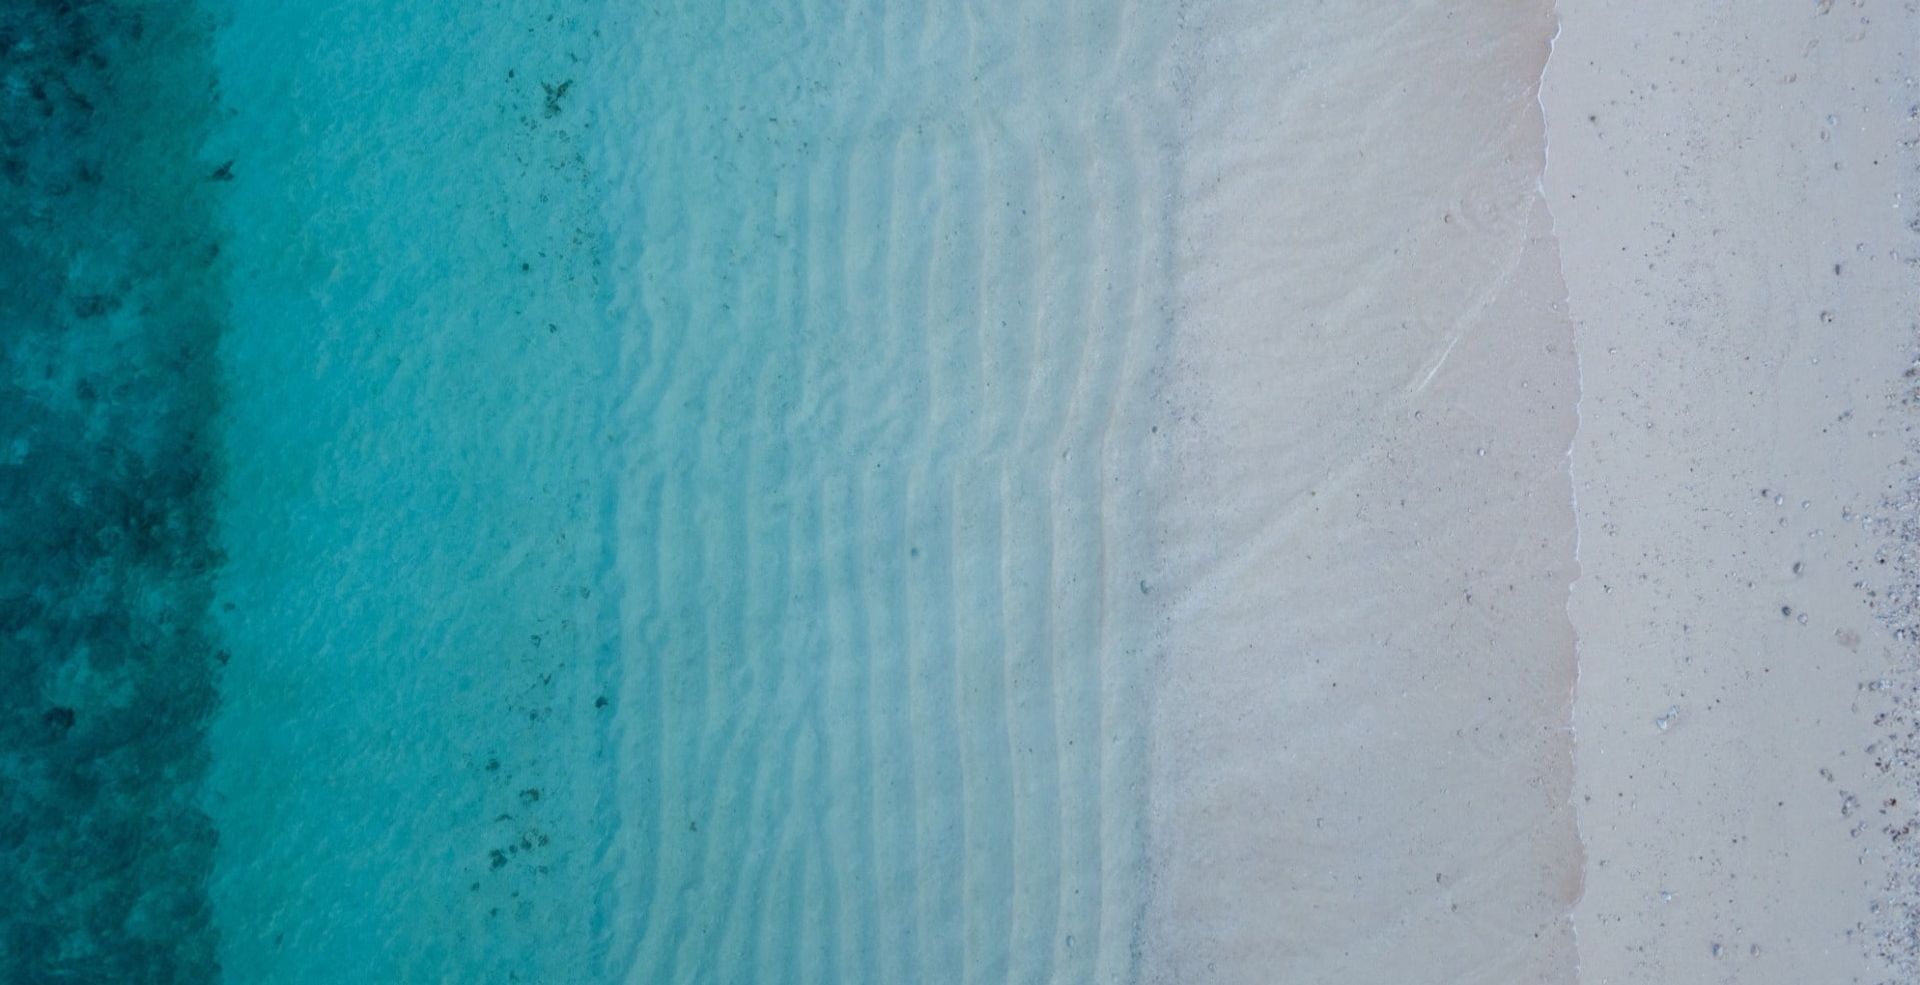 bird's view of a blue gradient sea